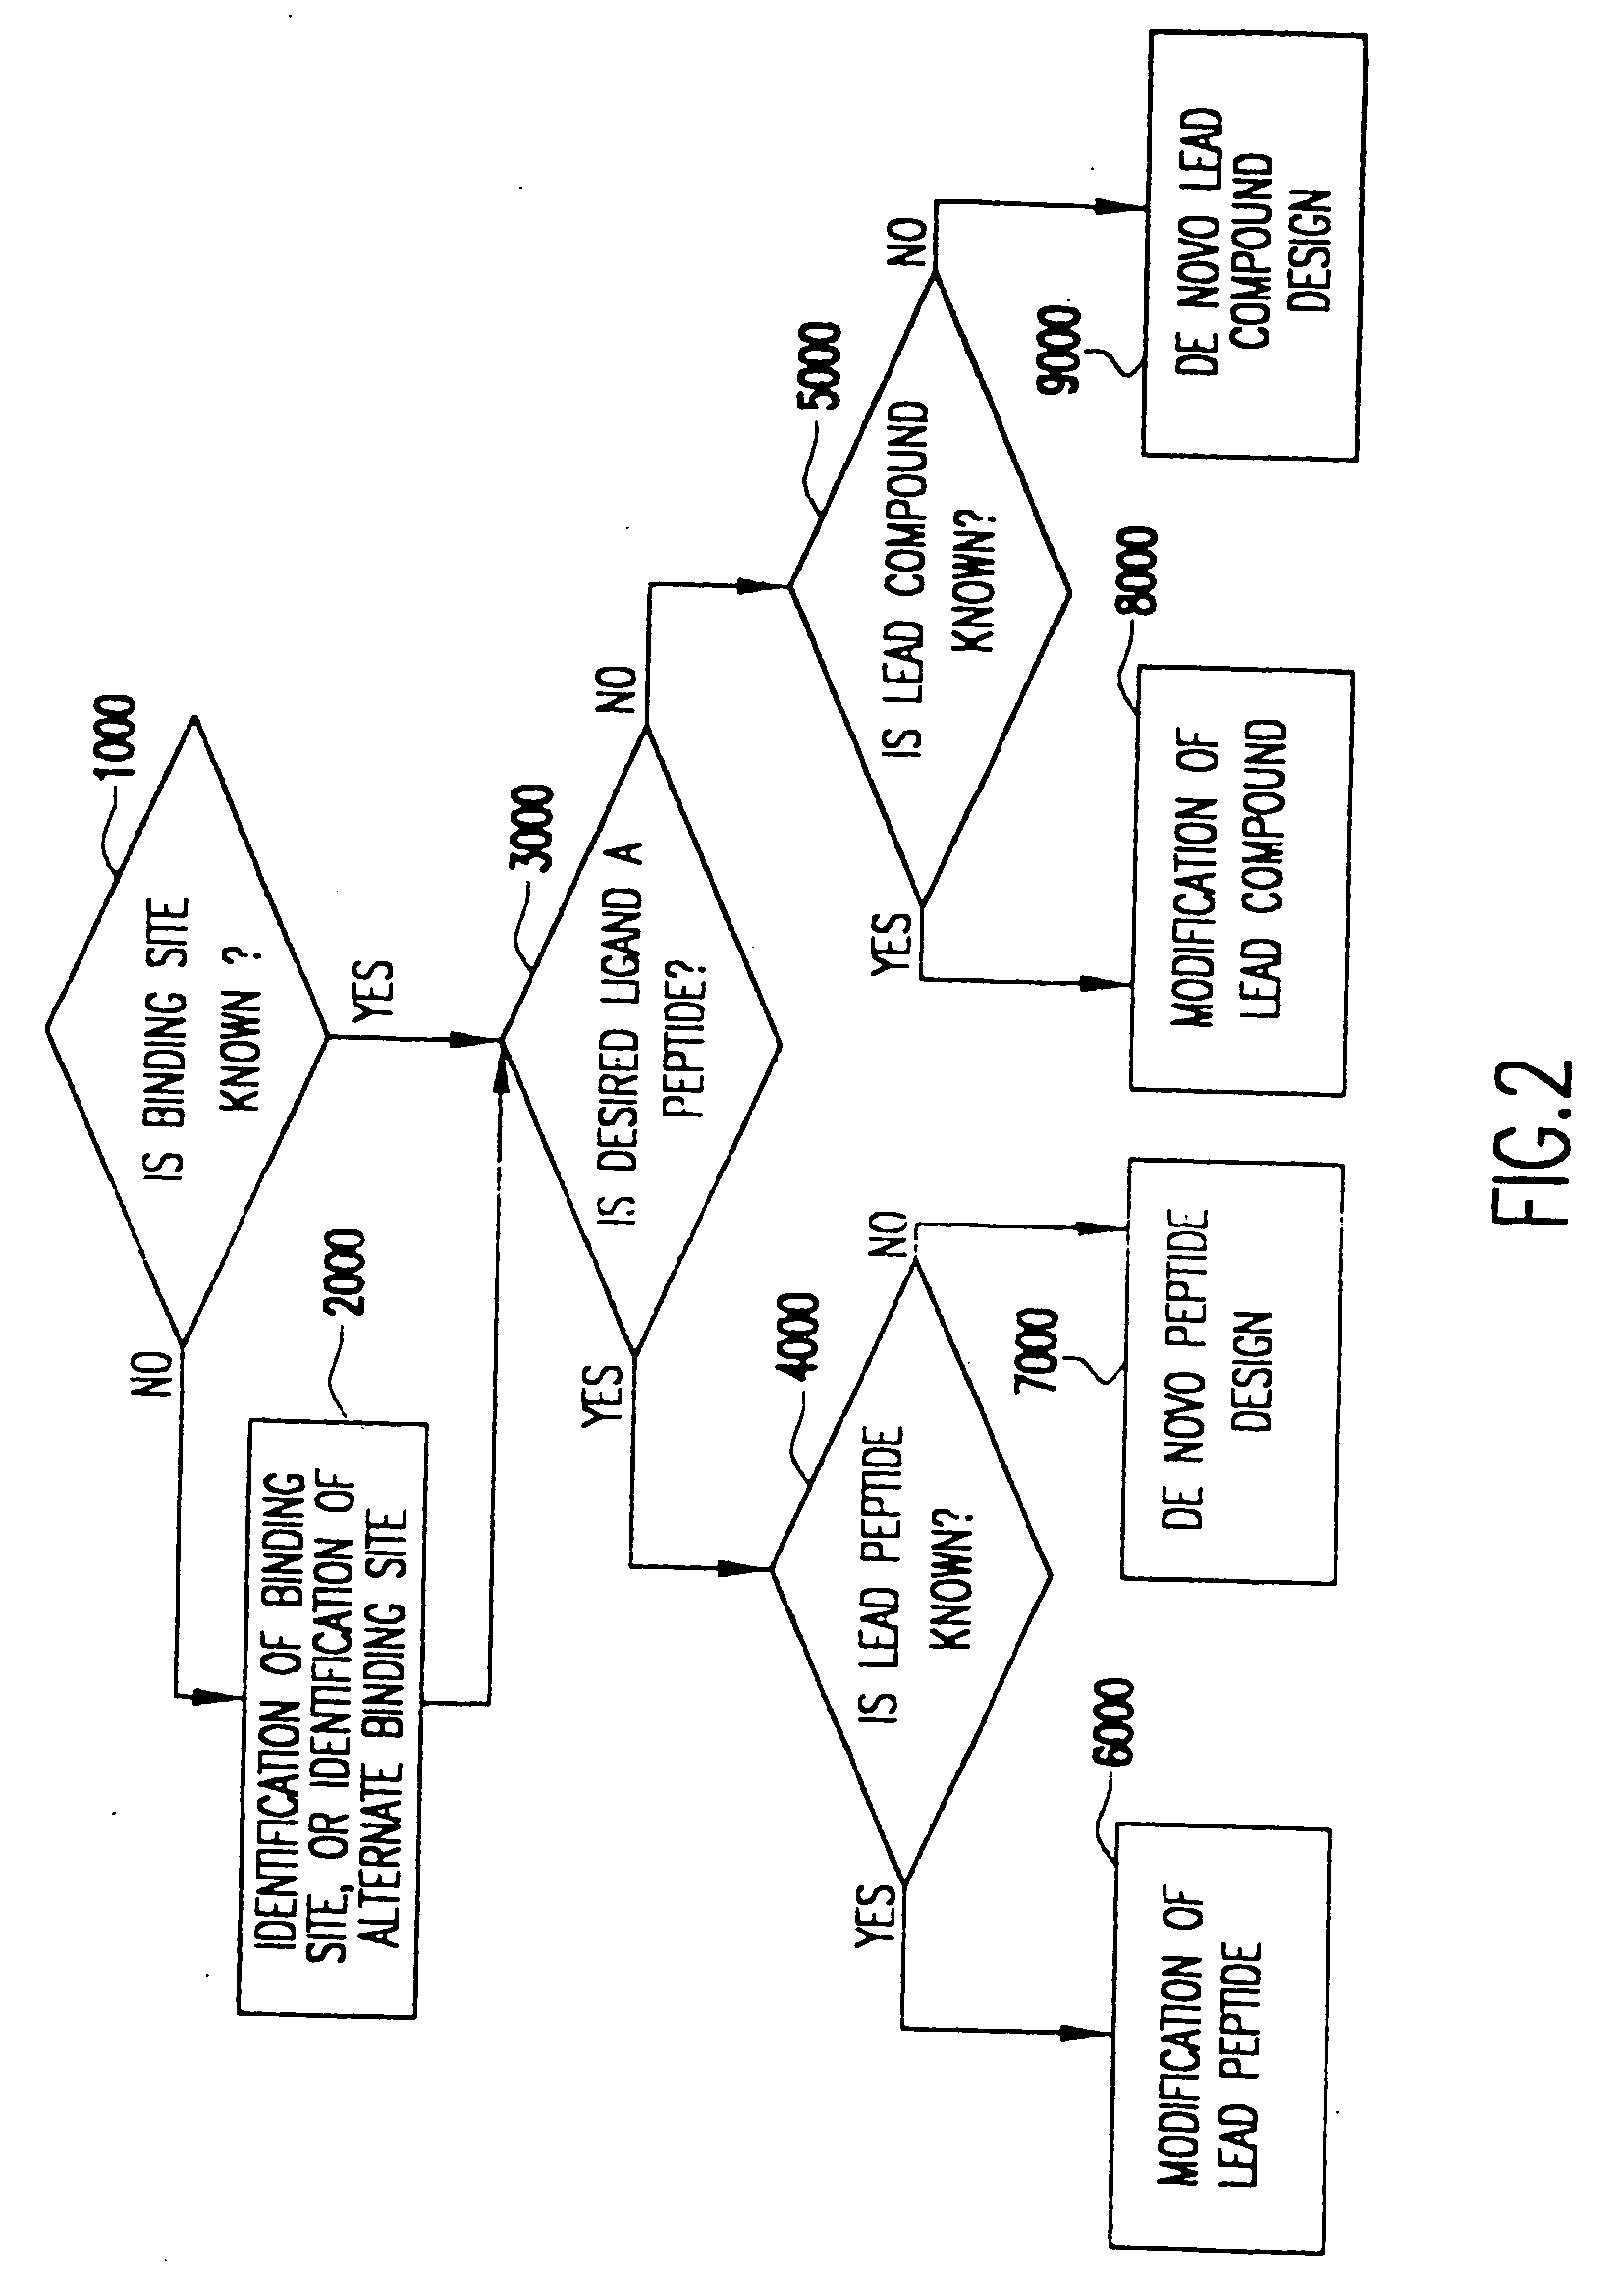 Method for the prediction of binding targets and the design of ligands